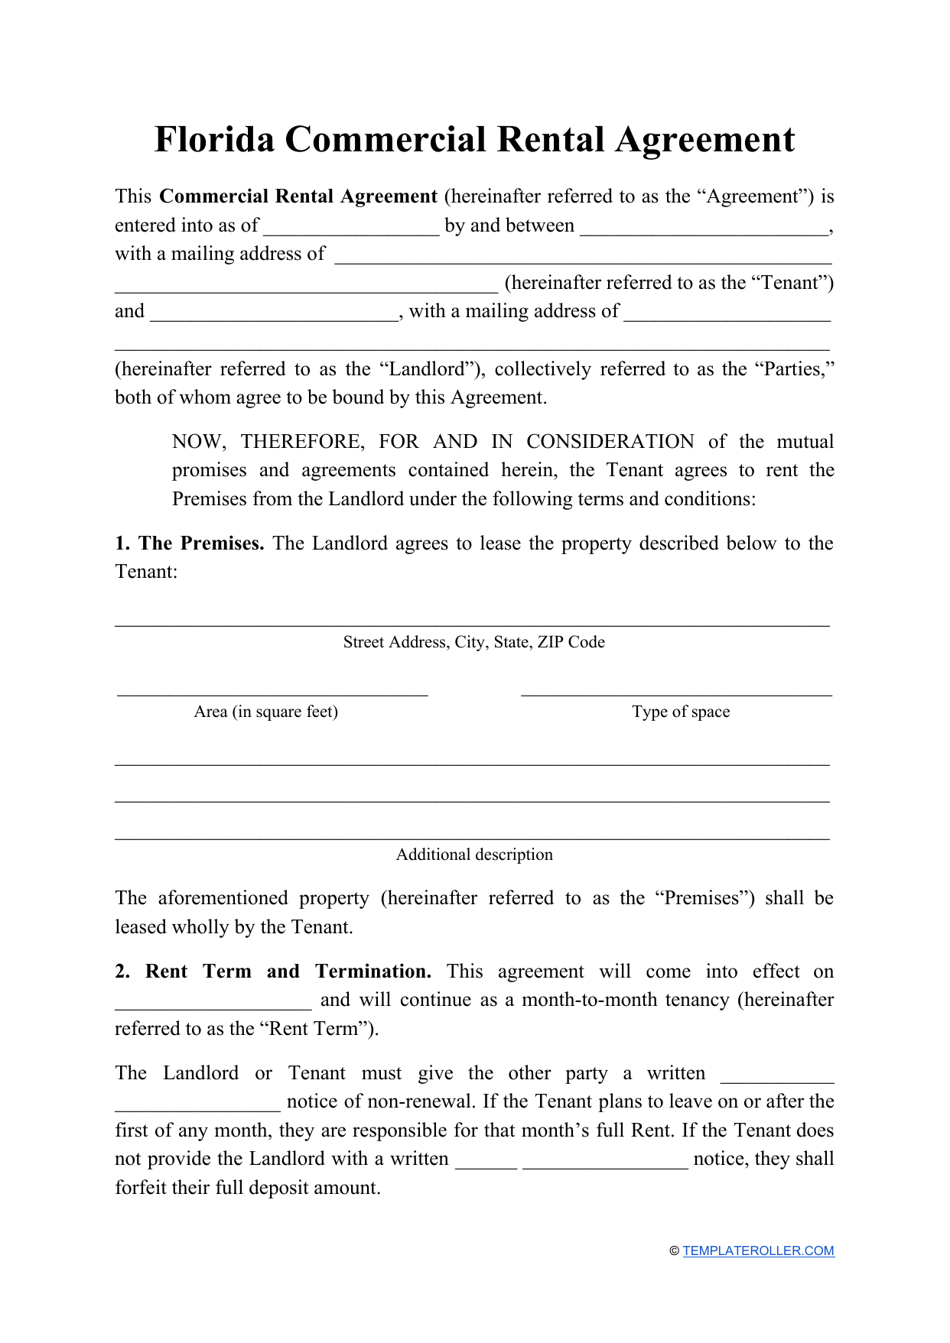 florida-commercial-rental-agreement-template-fill-out-sign-online